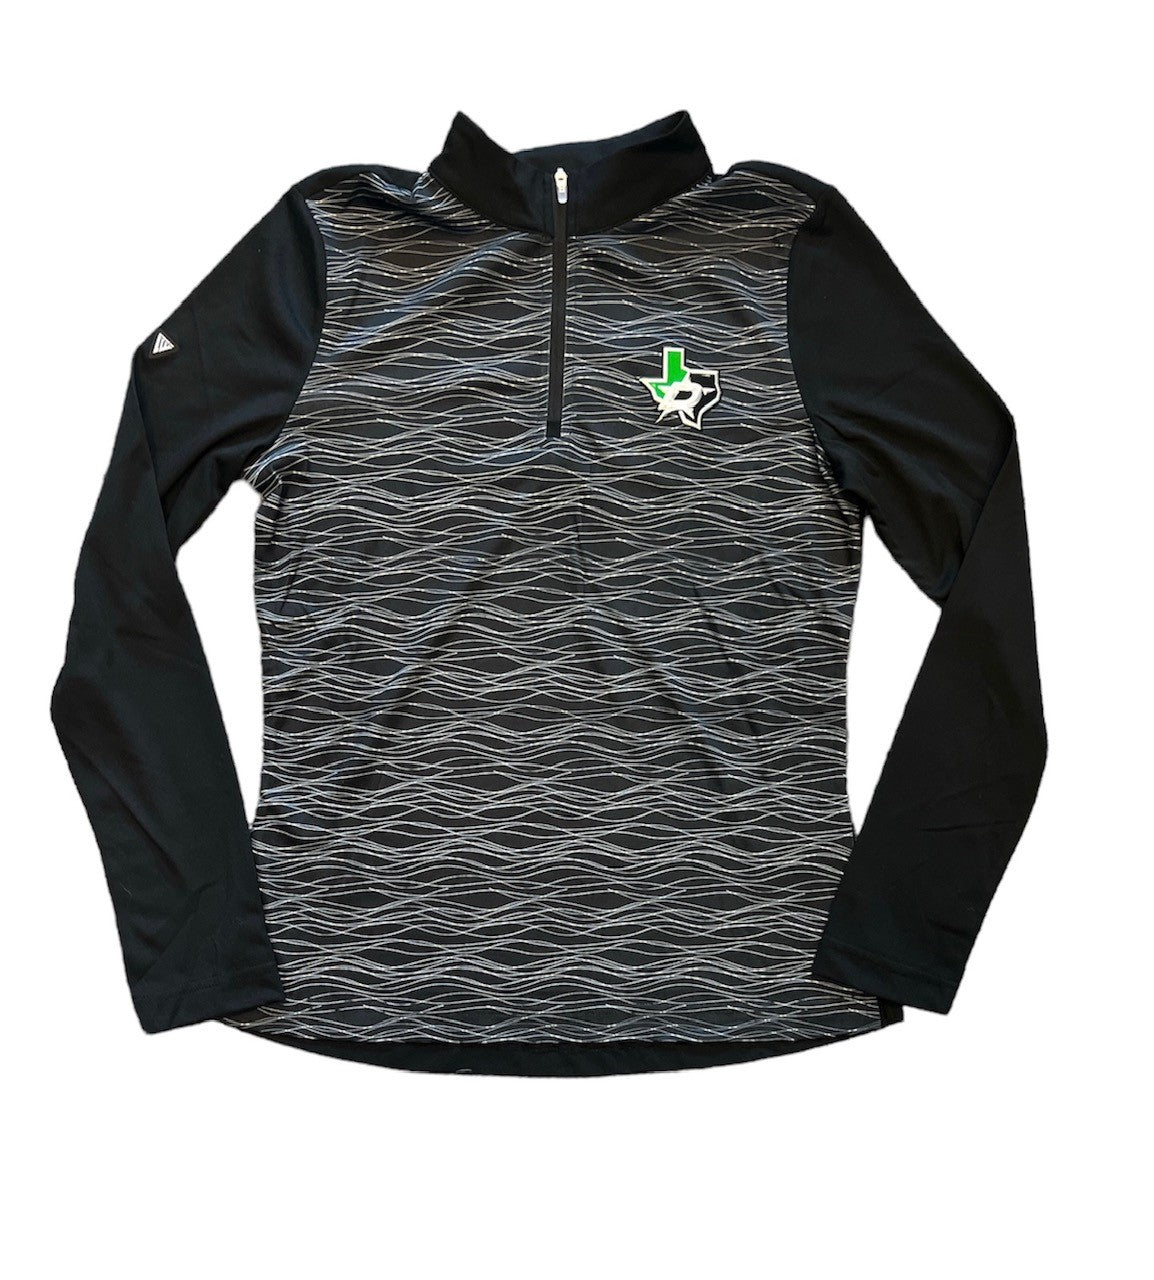 DALLAS STARS LEVELWEAR WMN RIVER 1/4 ZIP - Photo of front view of jacket